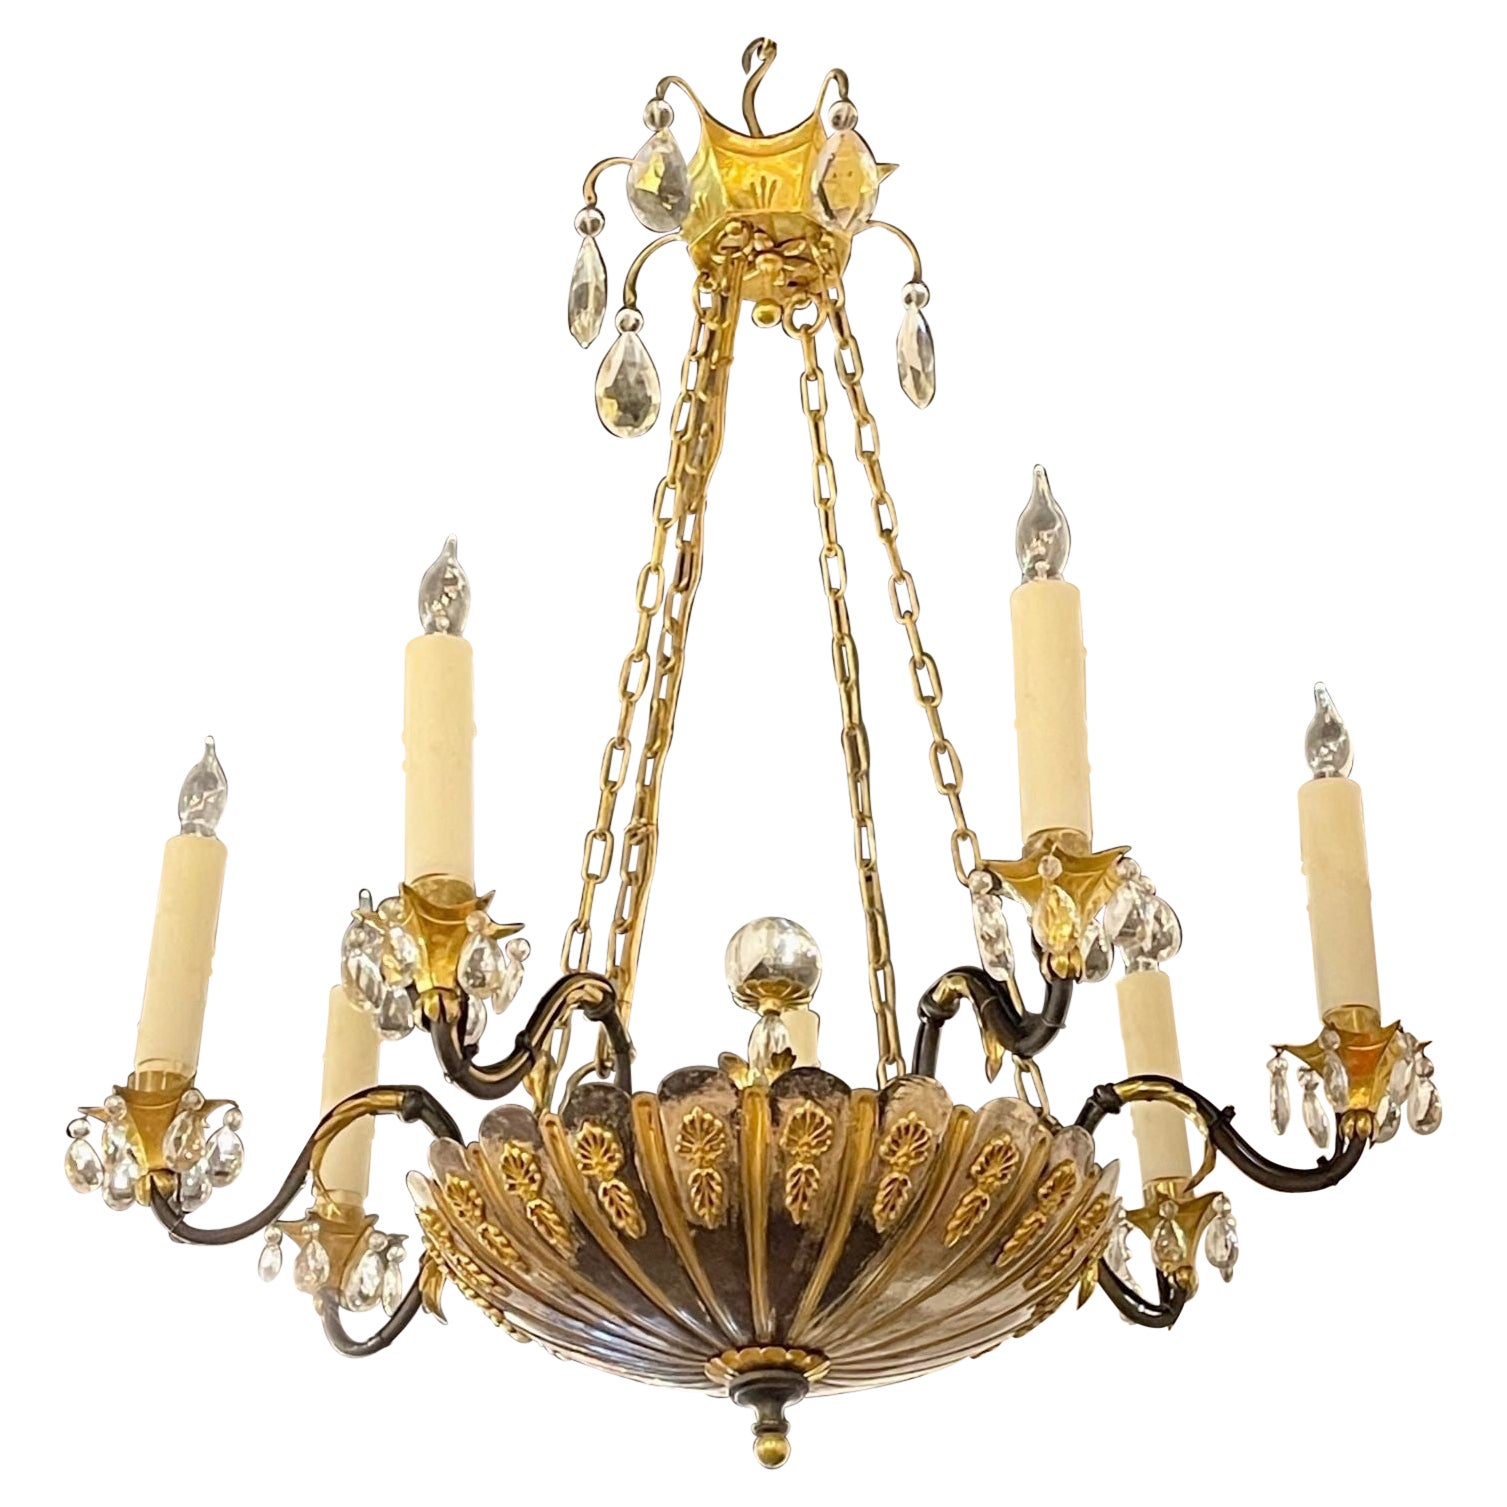 19th Century English Silver and Bronze 7 Light Chandelier For Sale